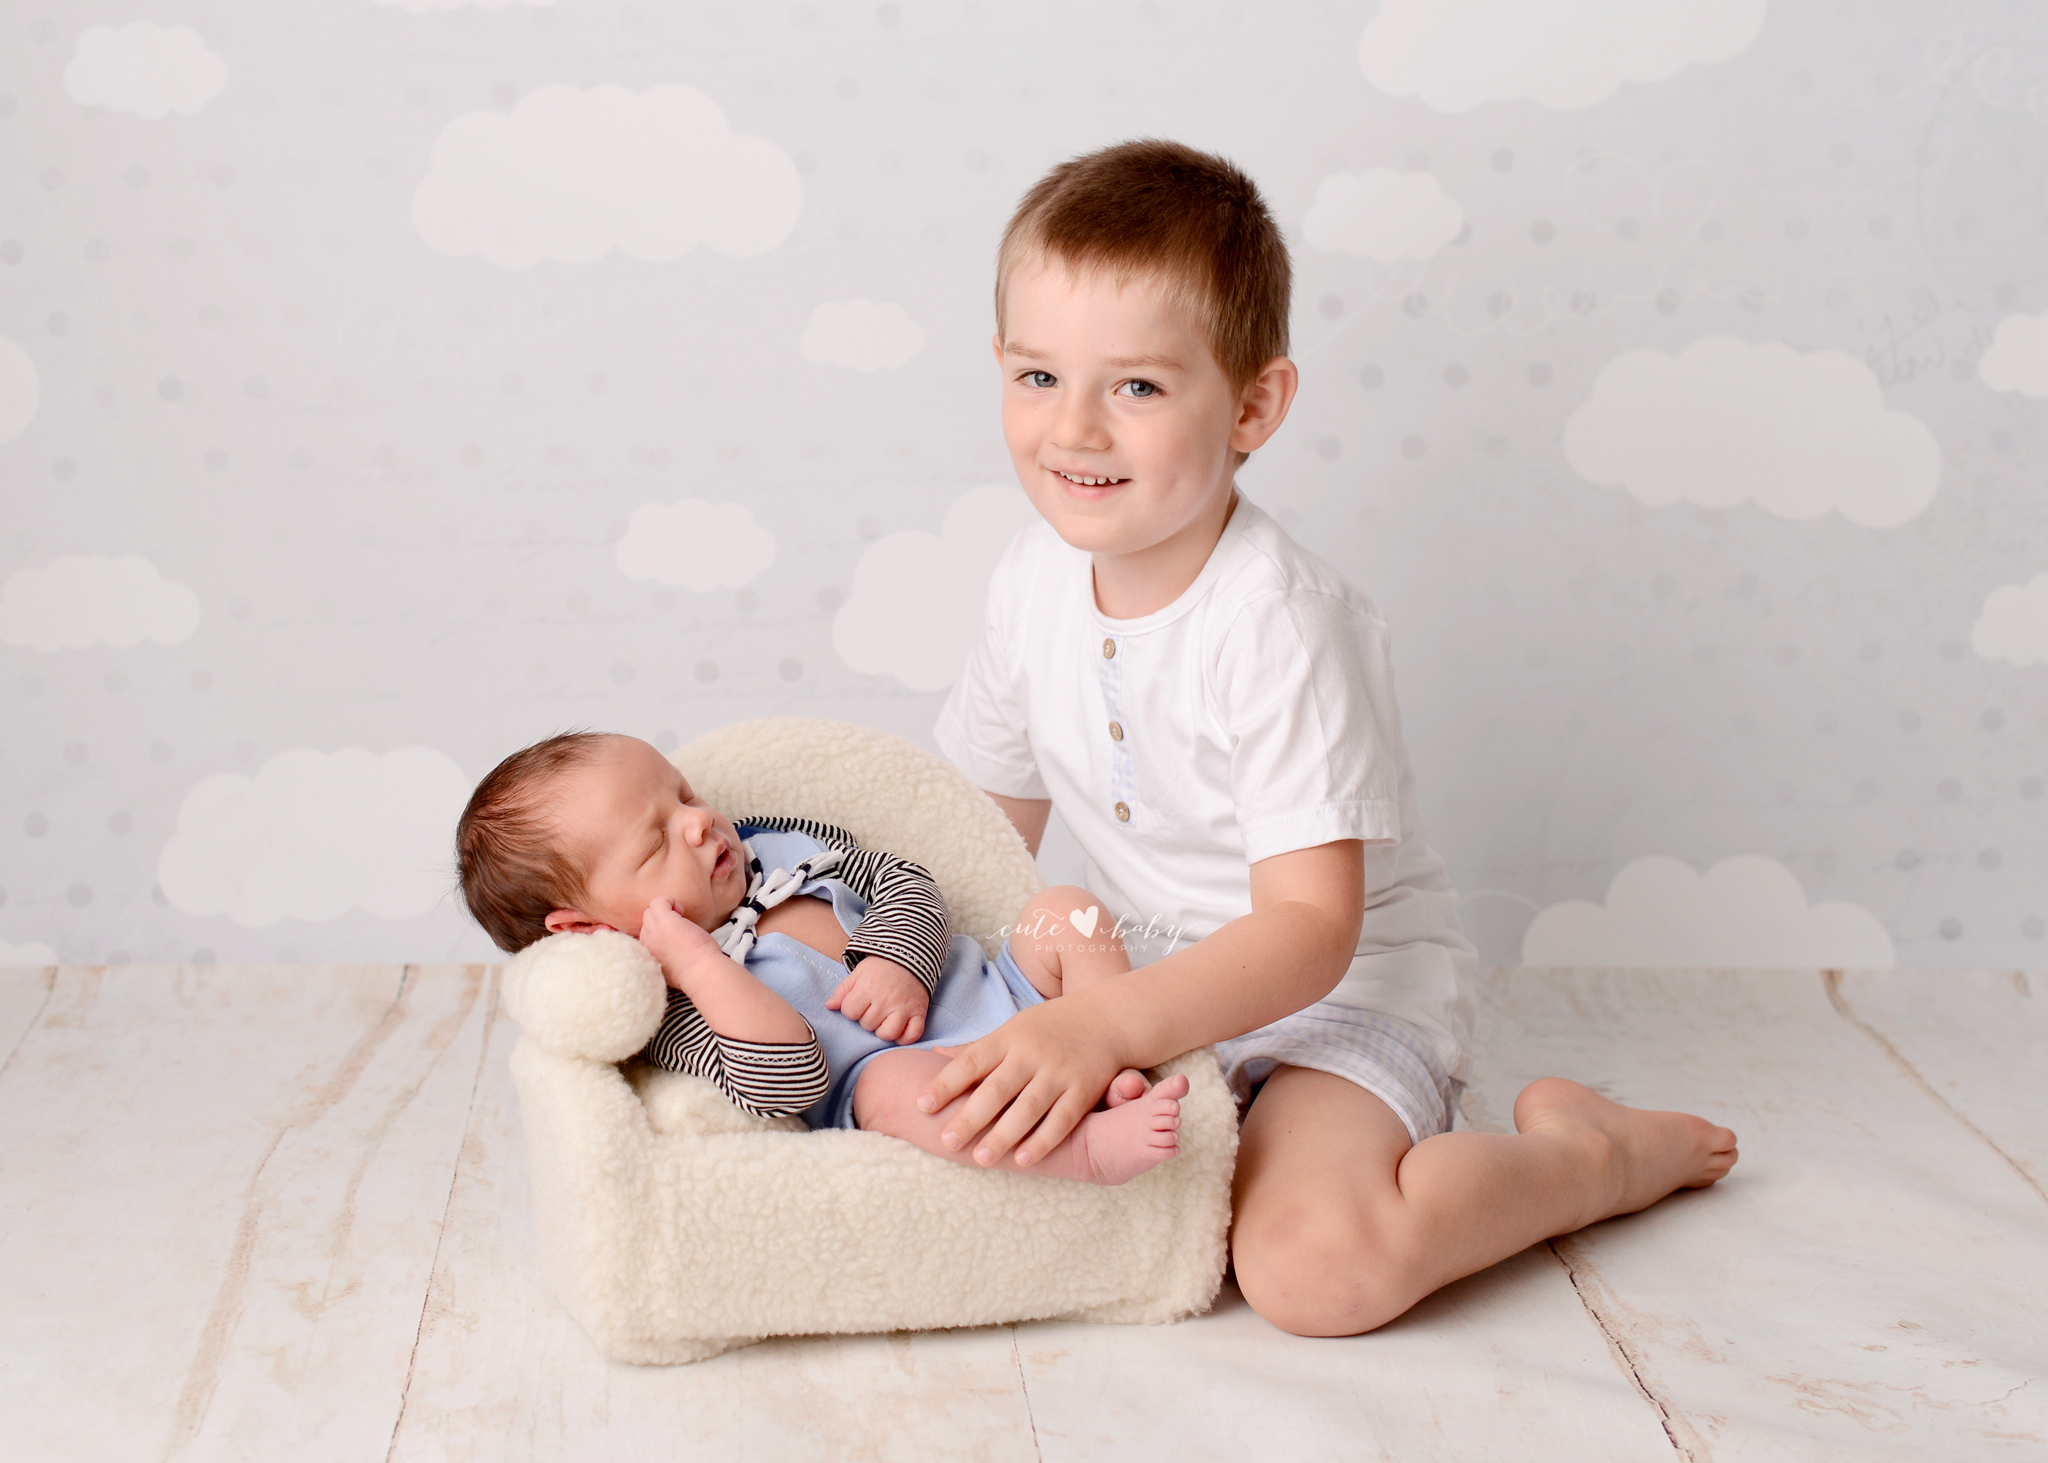 Newborn Photography Manchester by Cute Baby Photography, Newborn photography studio Greater Manchester, Baby Photography<br />
